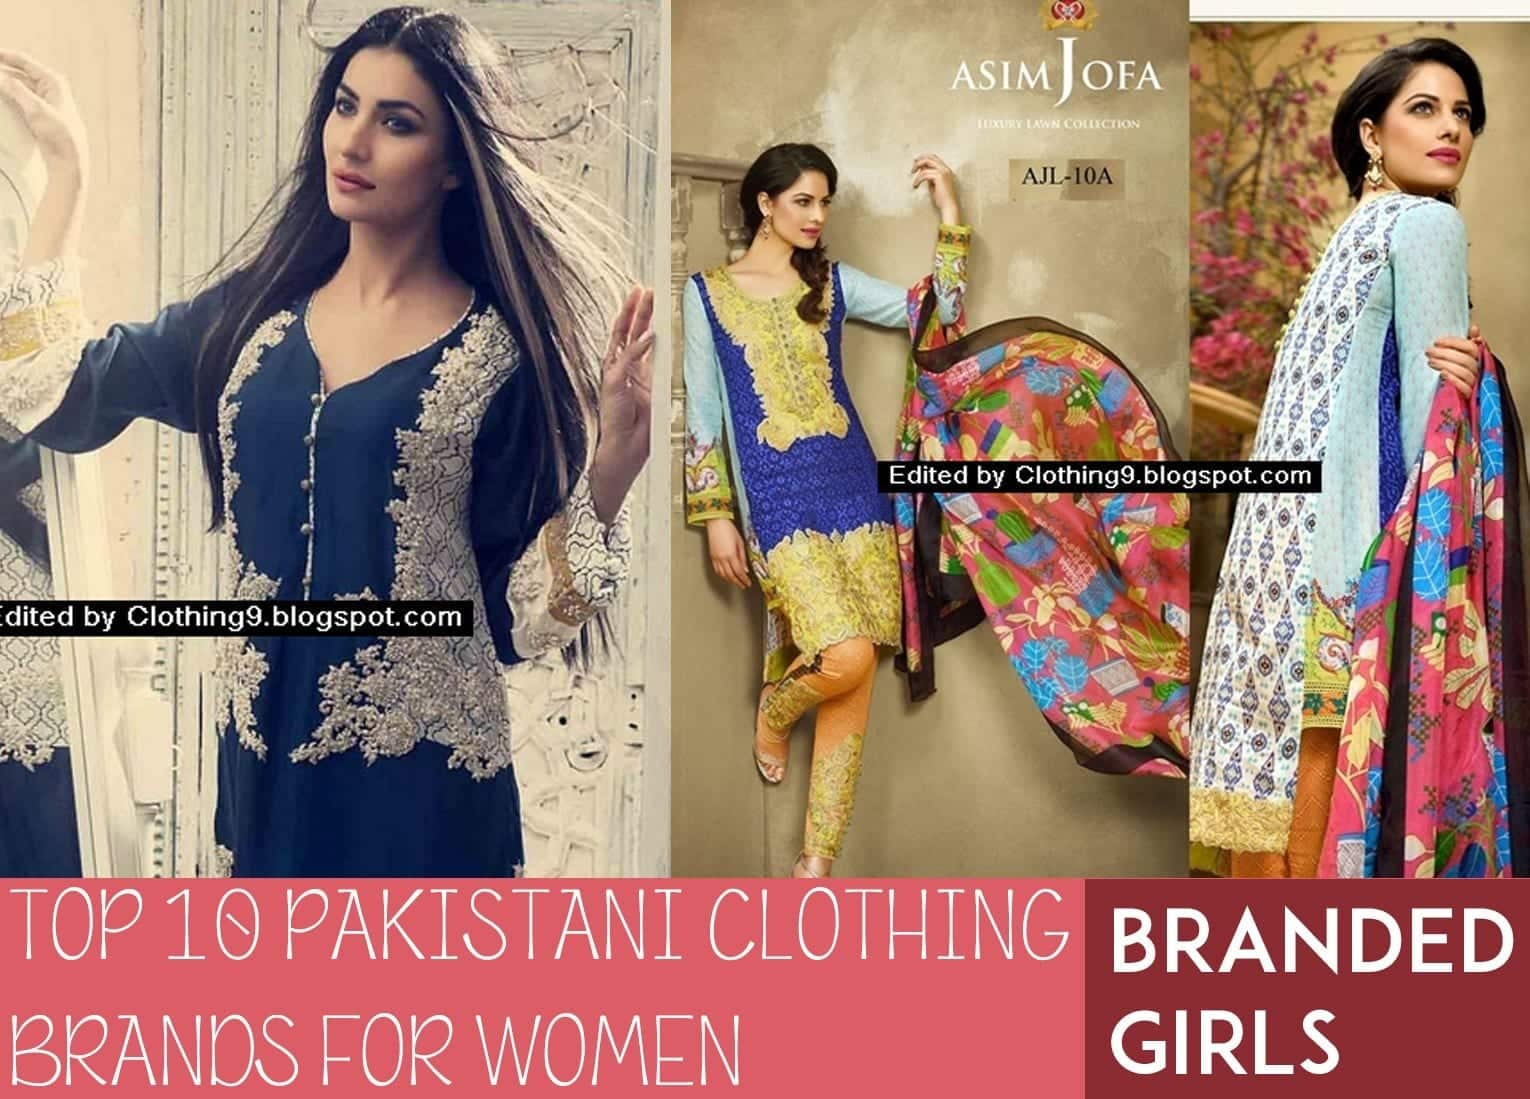 Top 10 Pakistani Clothing Brands for Women 2019